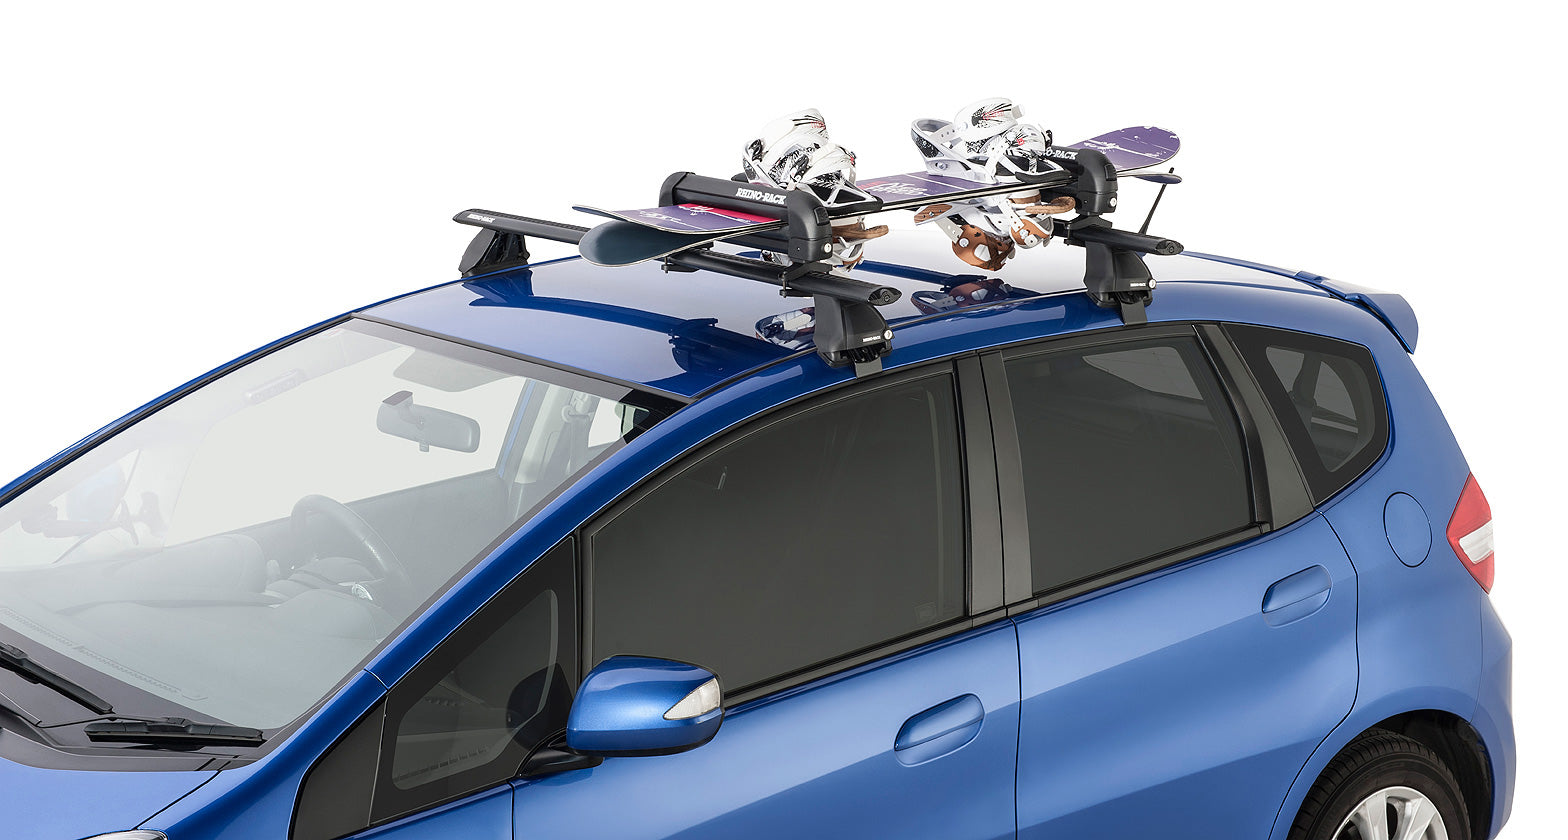 Rhino Rack Ski And Snowboard Carrier - 2 Skis Or 2 Snowboards - 573